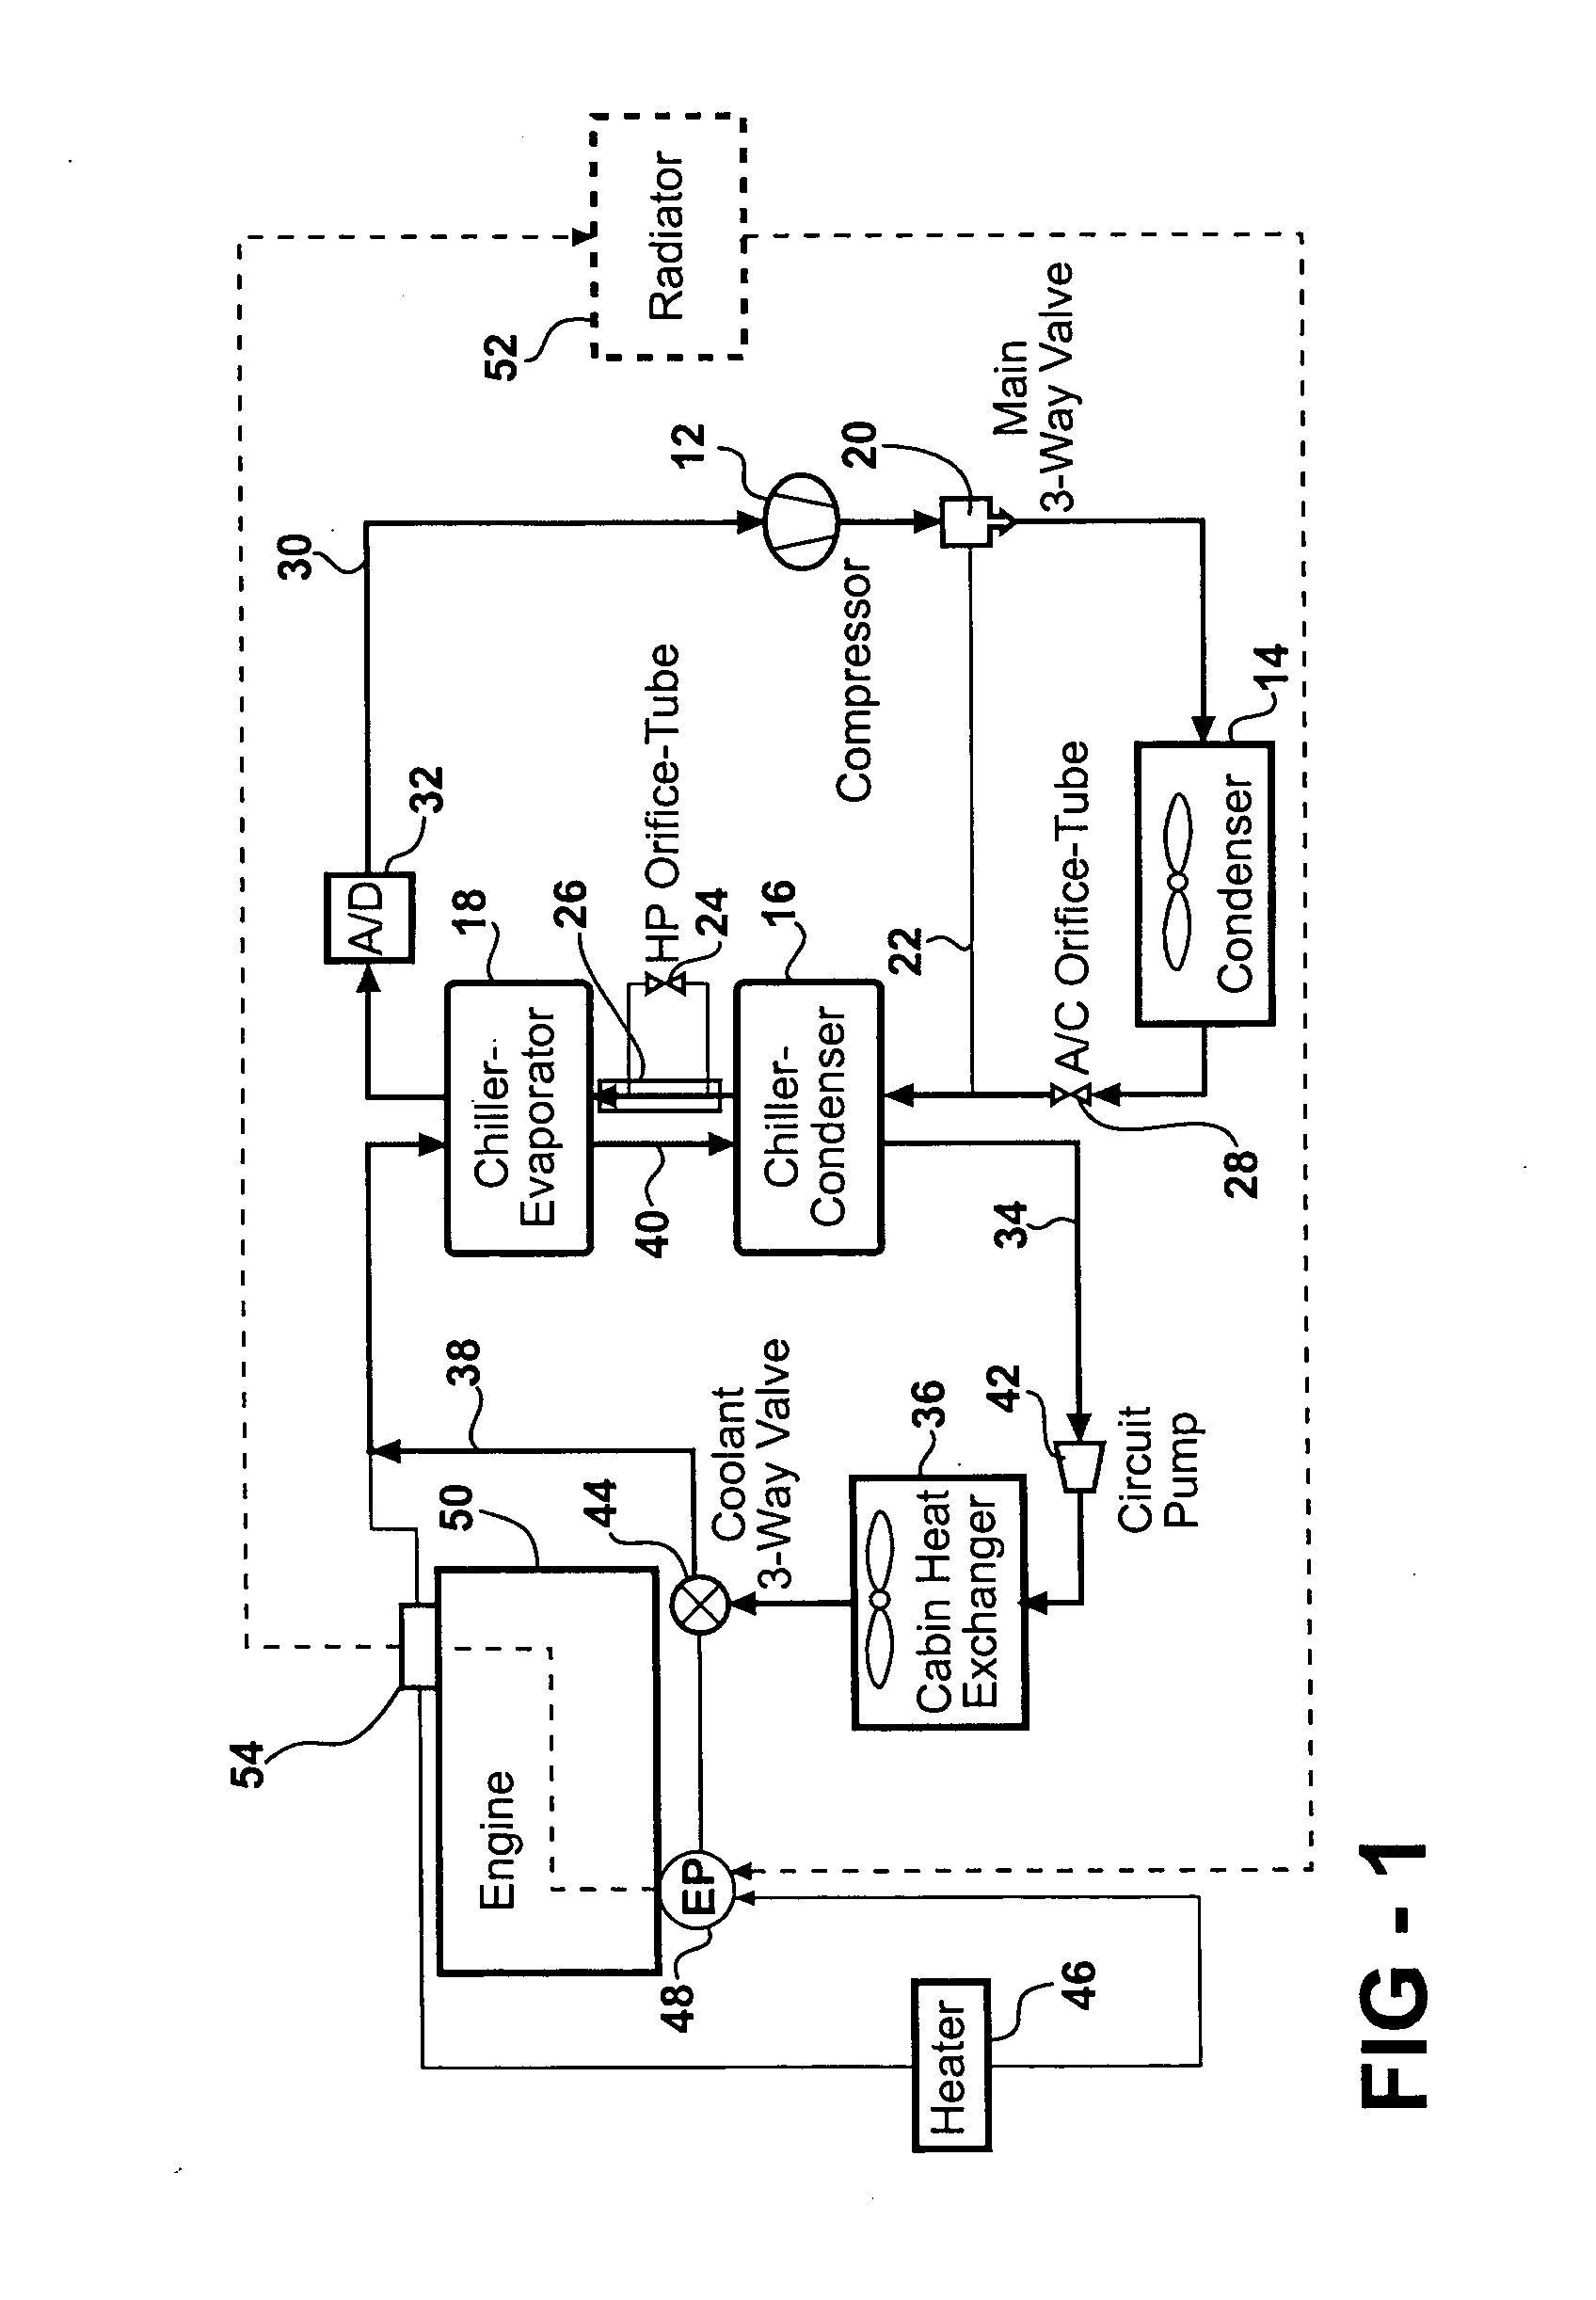 Heat pump with secondary loop air-conditioning system